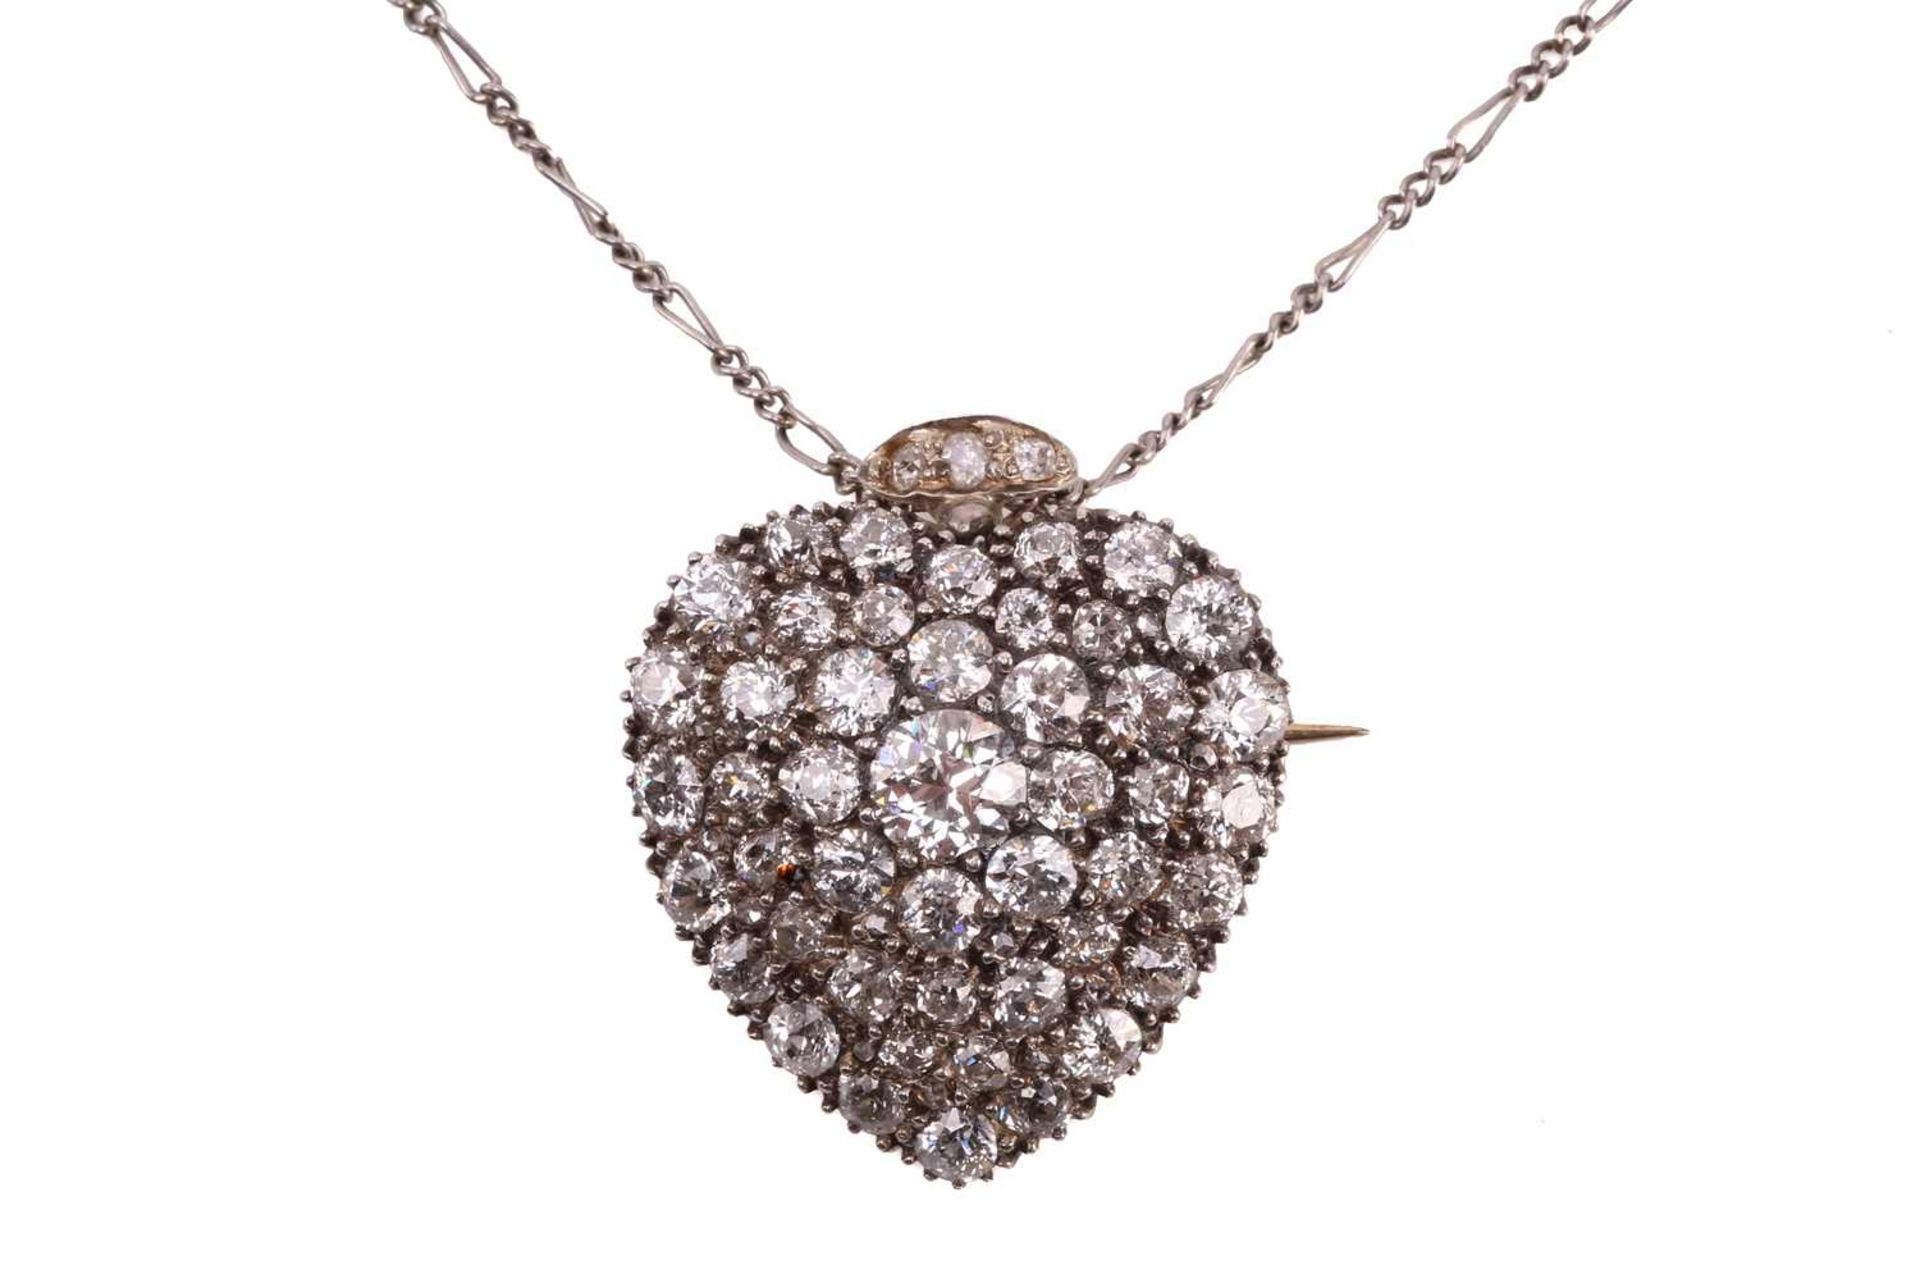 A Victorian diamond heart pendant, circa 1900, set throughout with round old cut diamonds with a